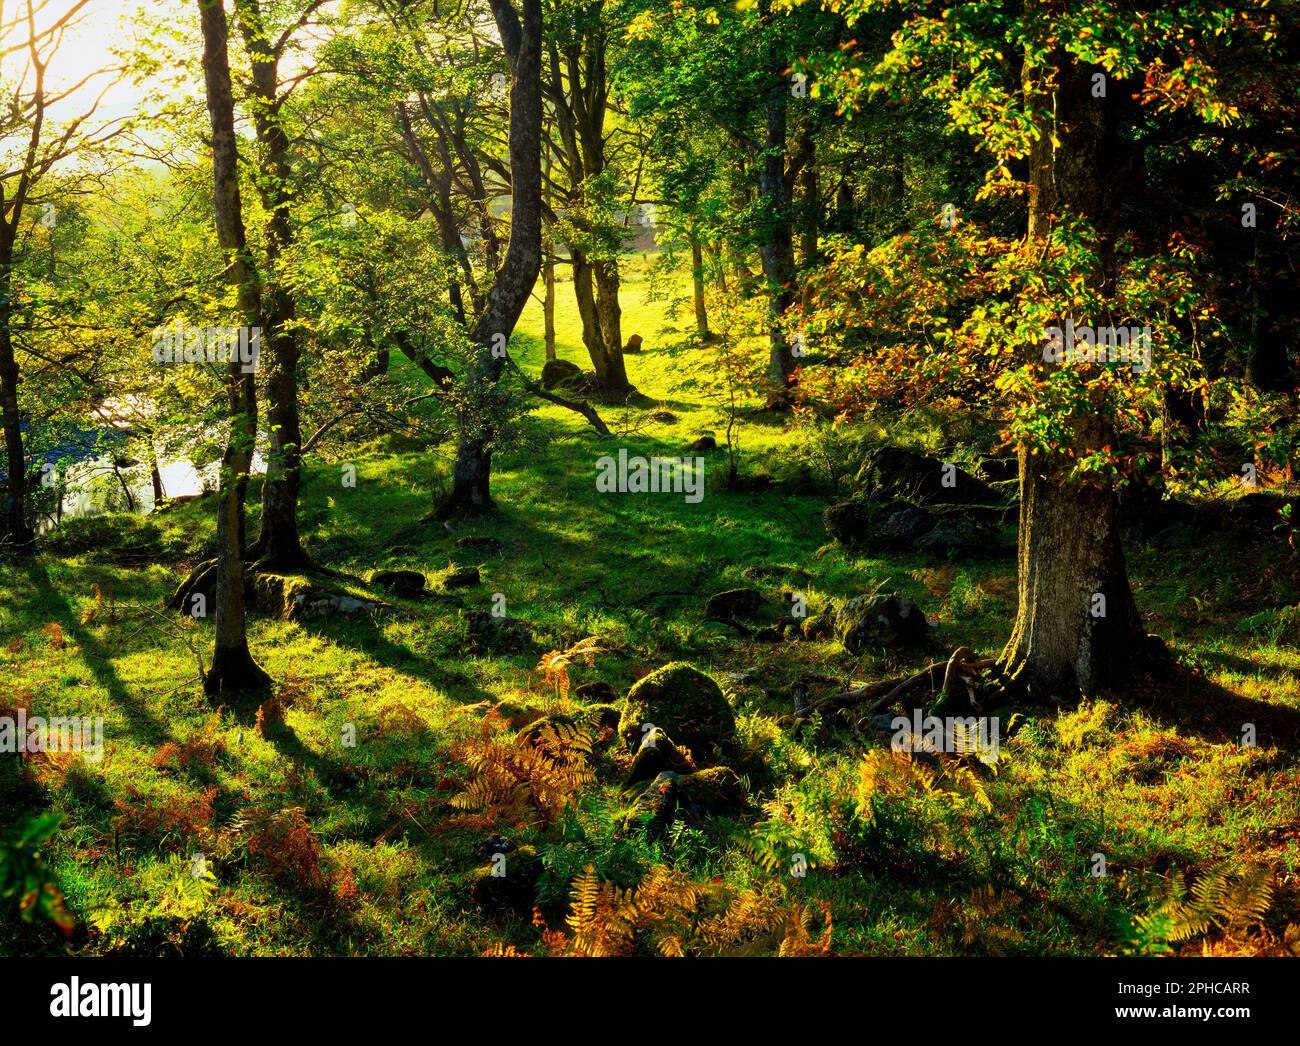 GB - WALES: Snowdonia National Forest Stock Photo